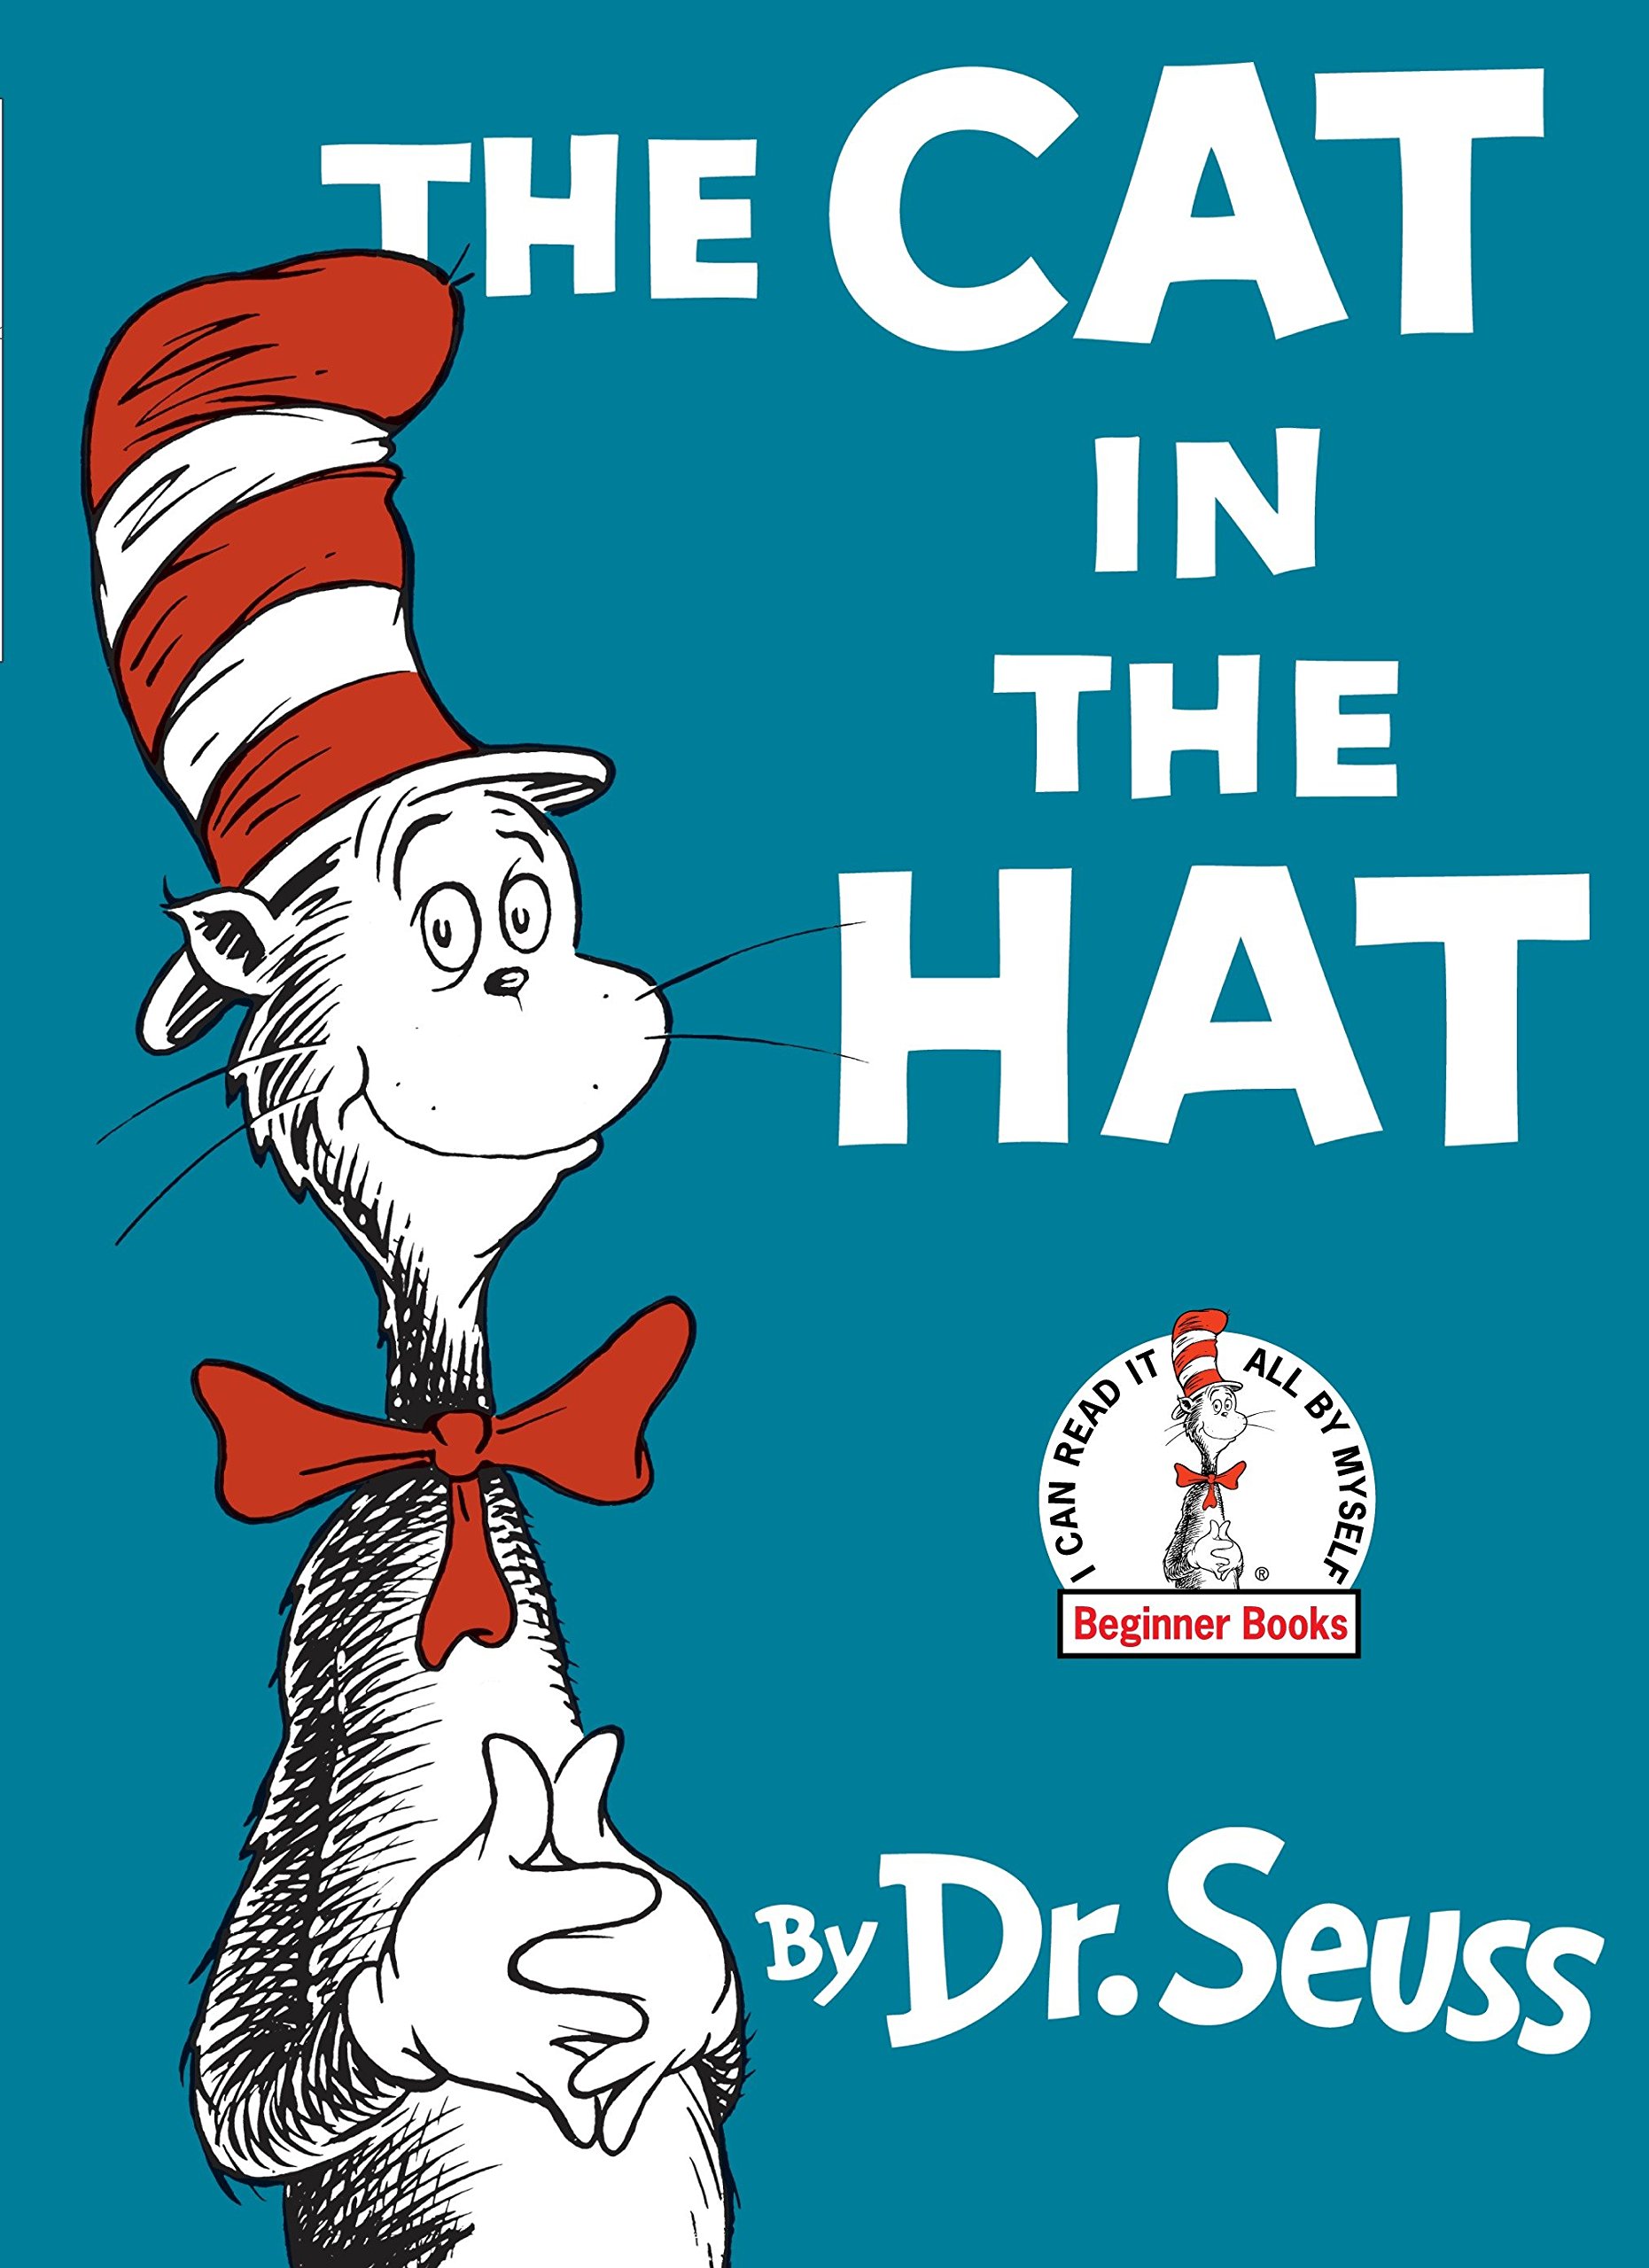 photo of the book "the cat in the hat"